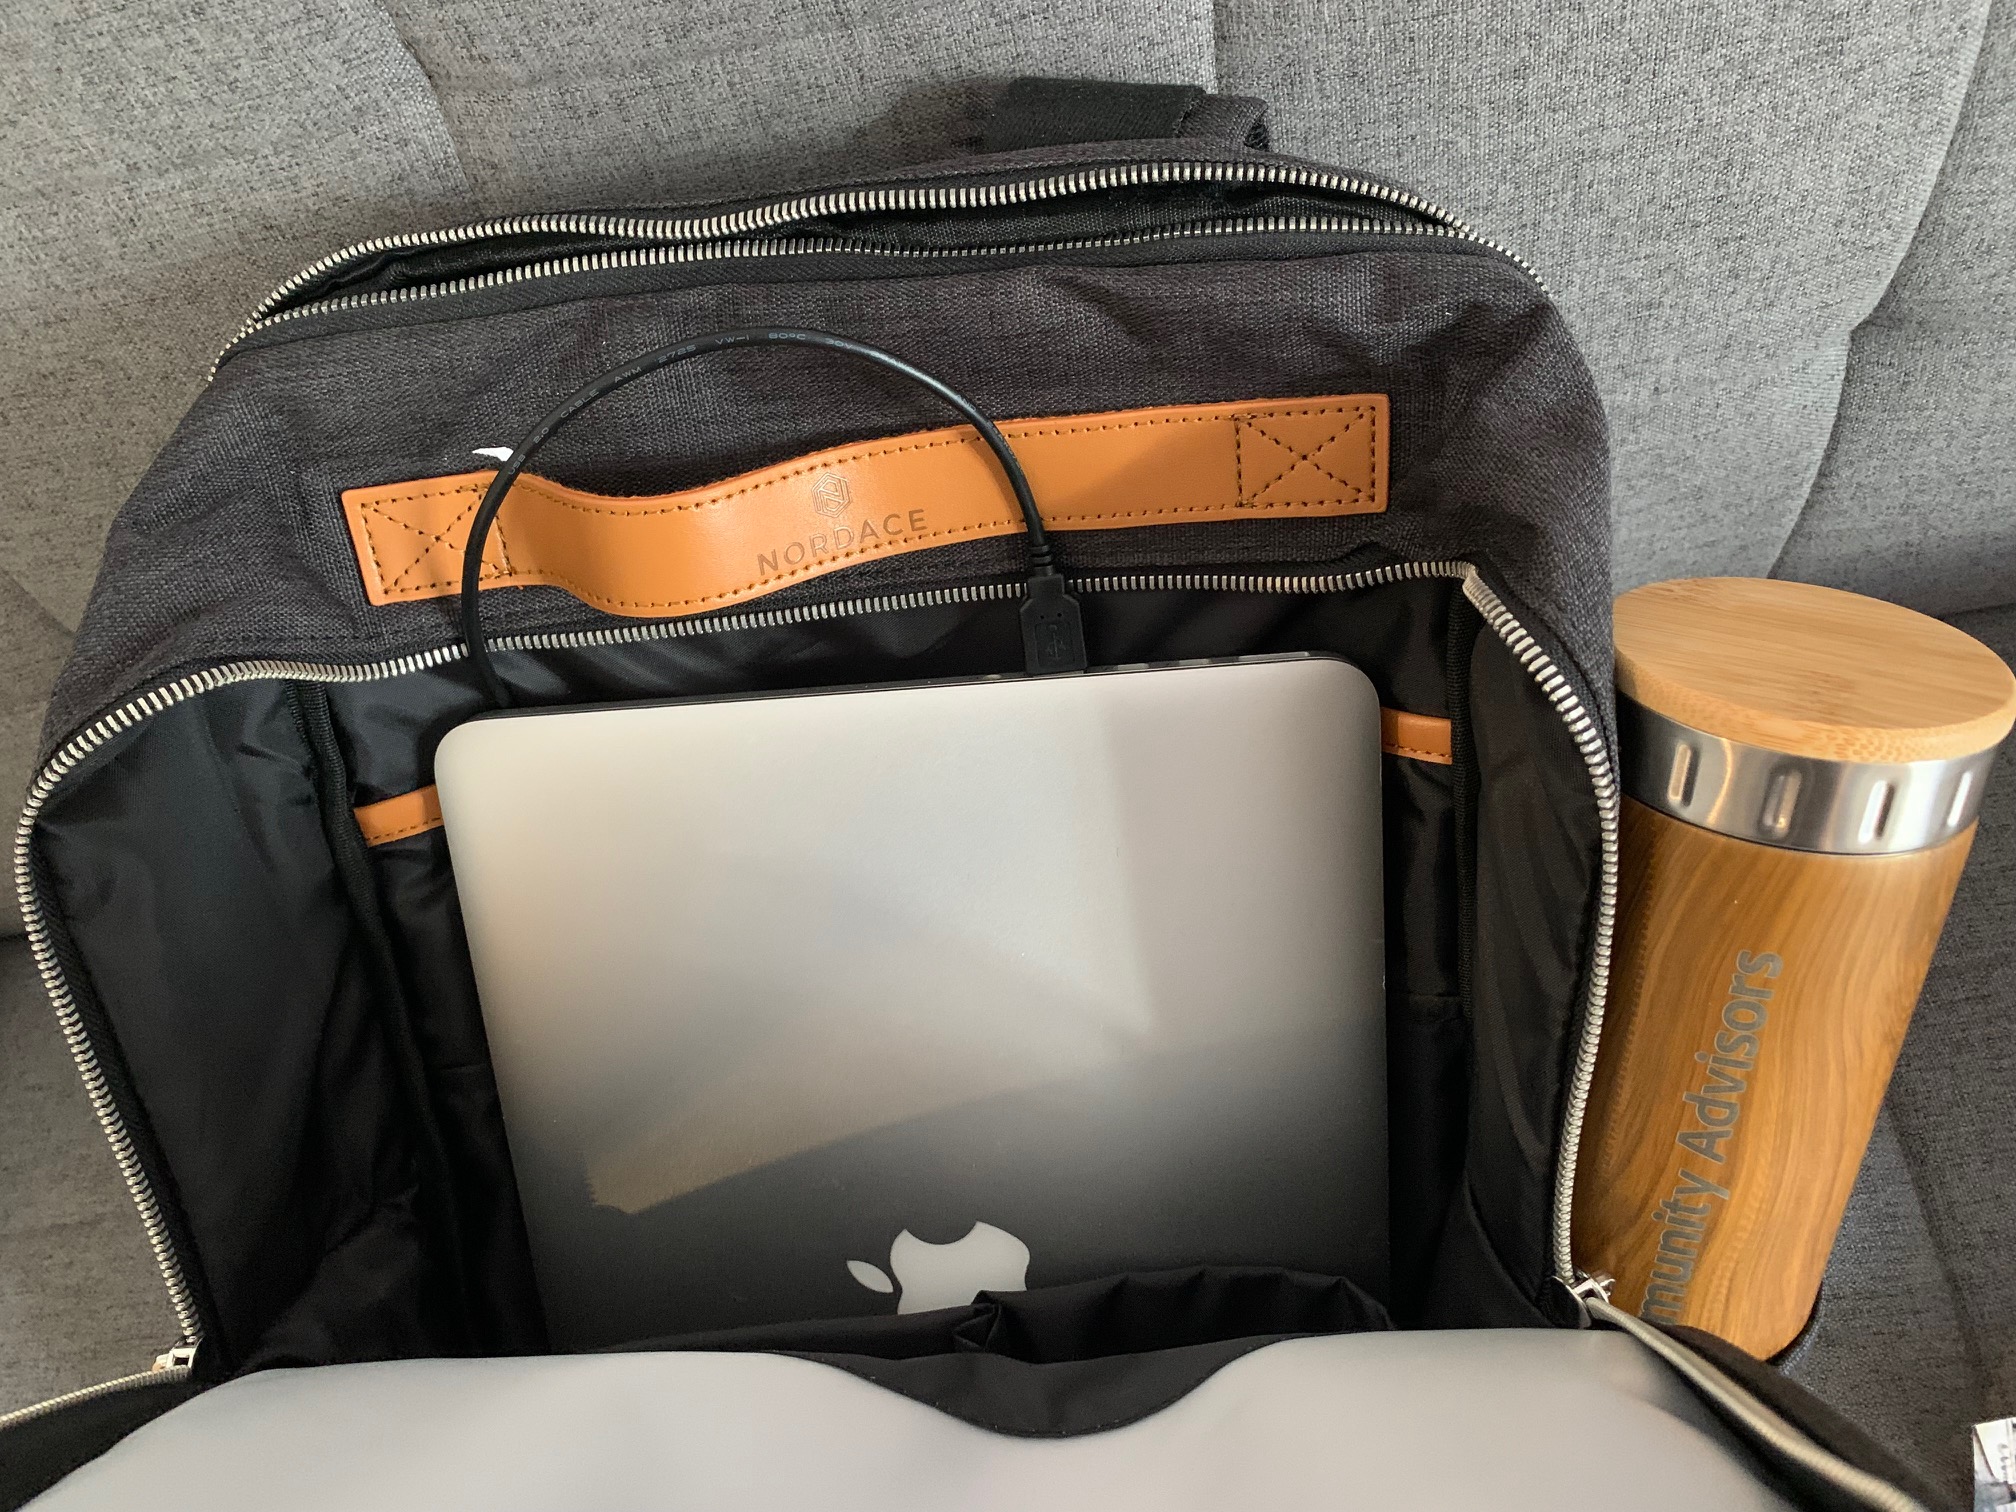 The Nordace backpack with its charging port to a Macbook